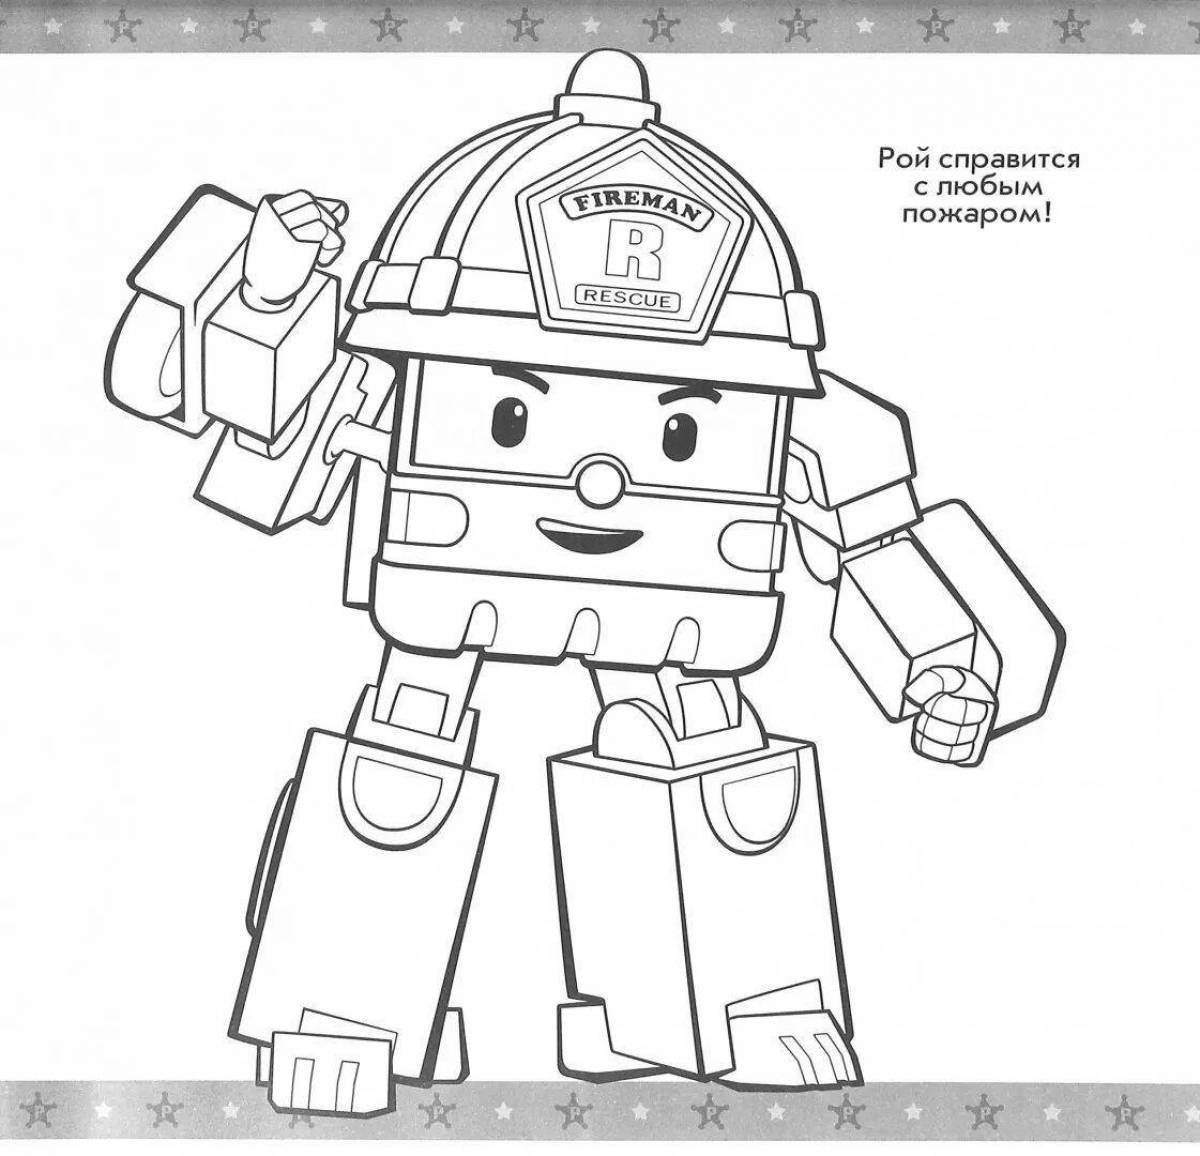 Ember coloring pages for kids